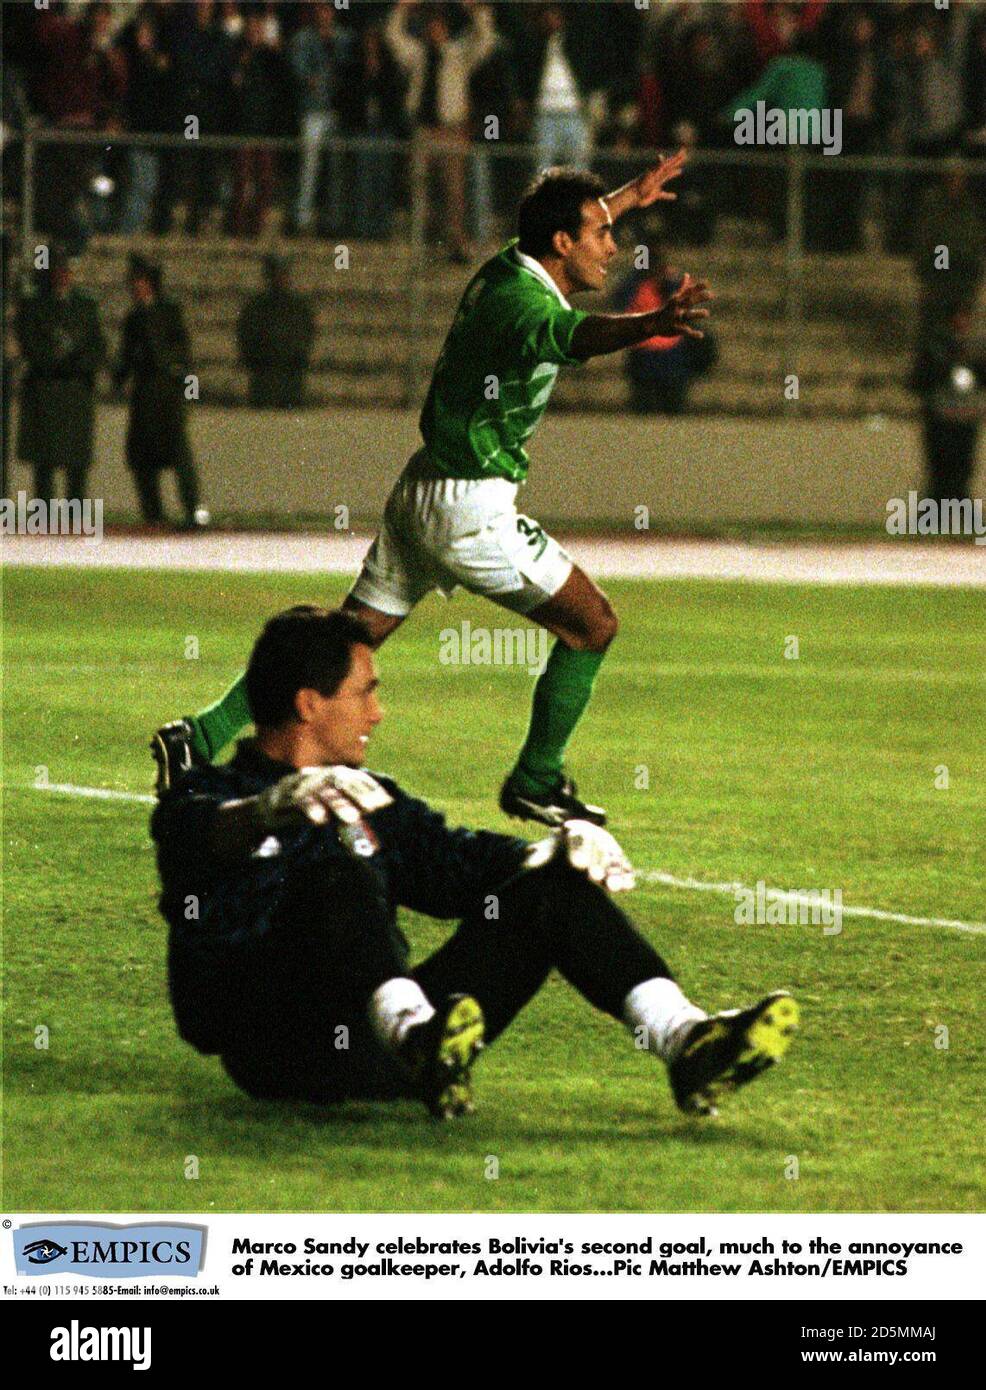 Marco Sandy celebrates Bolivia's second goal, much to the annoyance of Mexico goalkeeper, Adolfo Rios Stock Photo